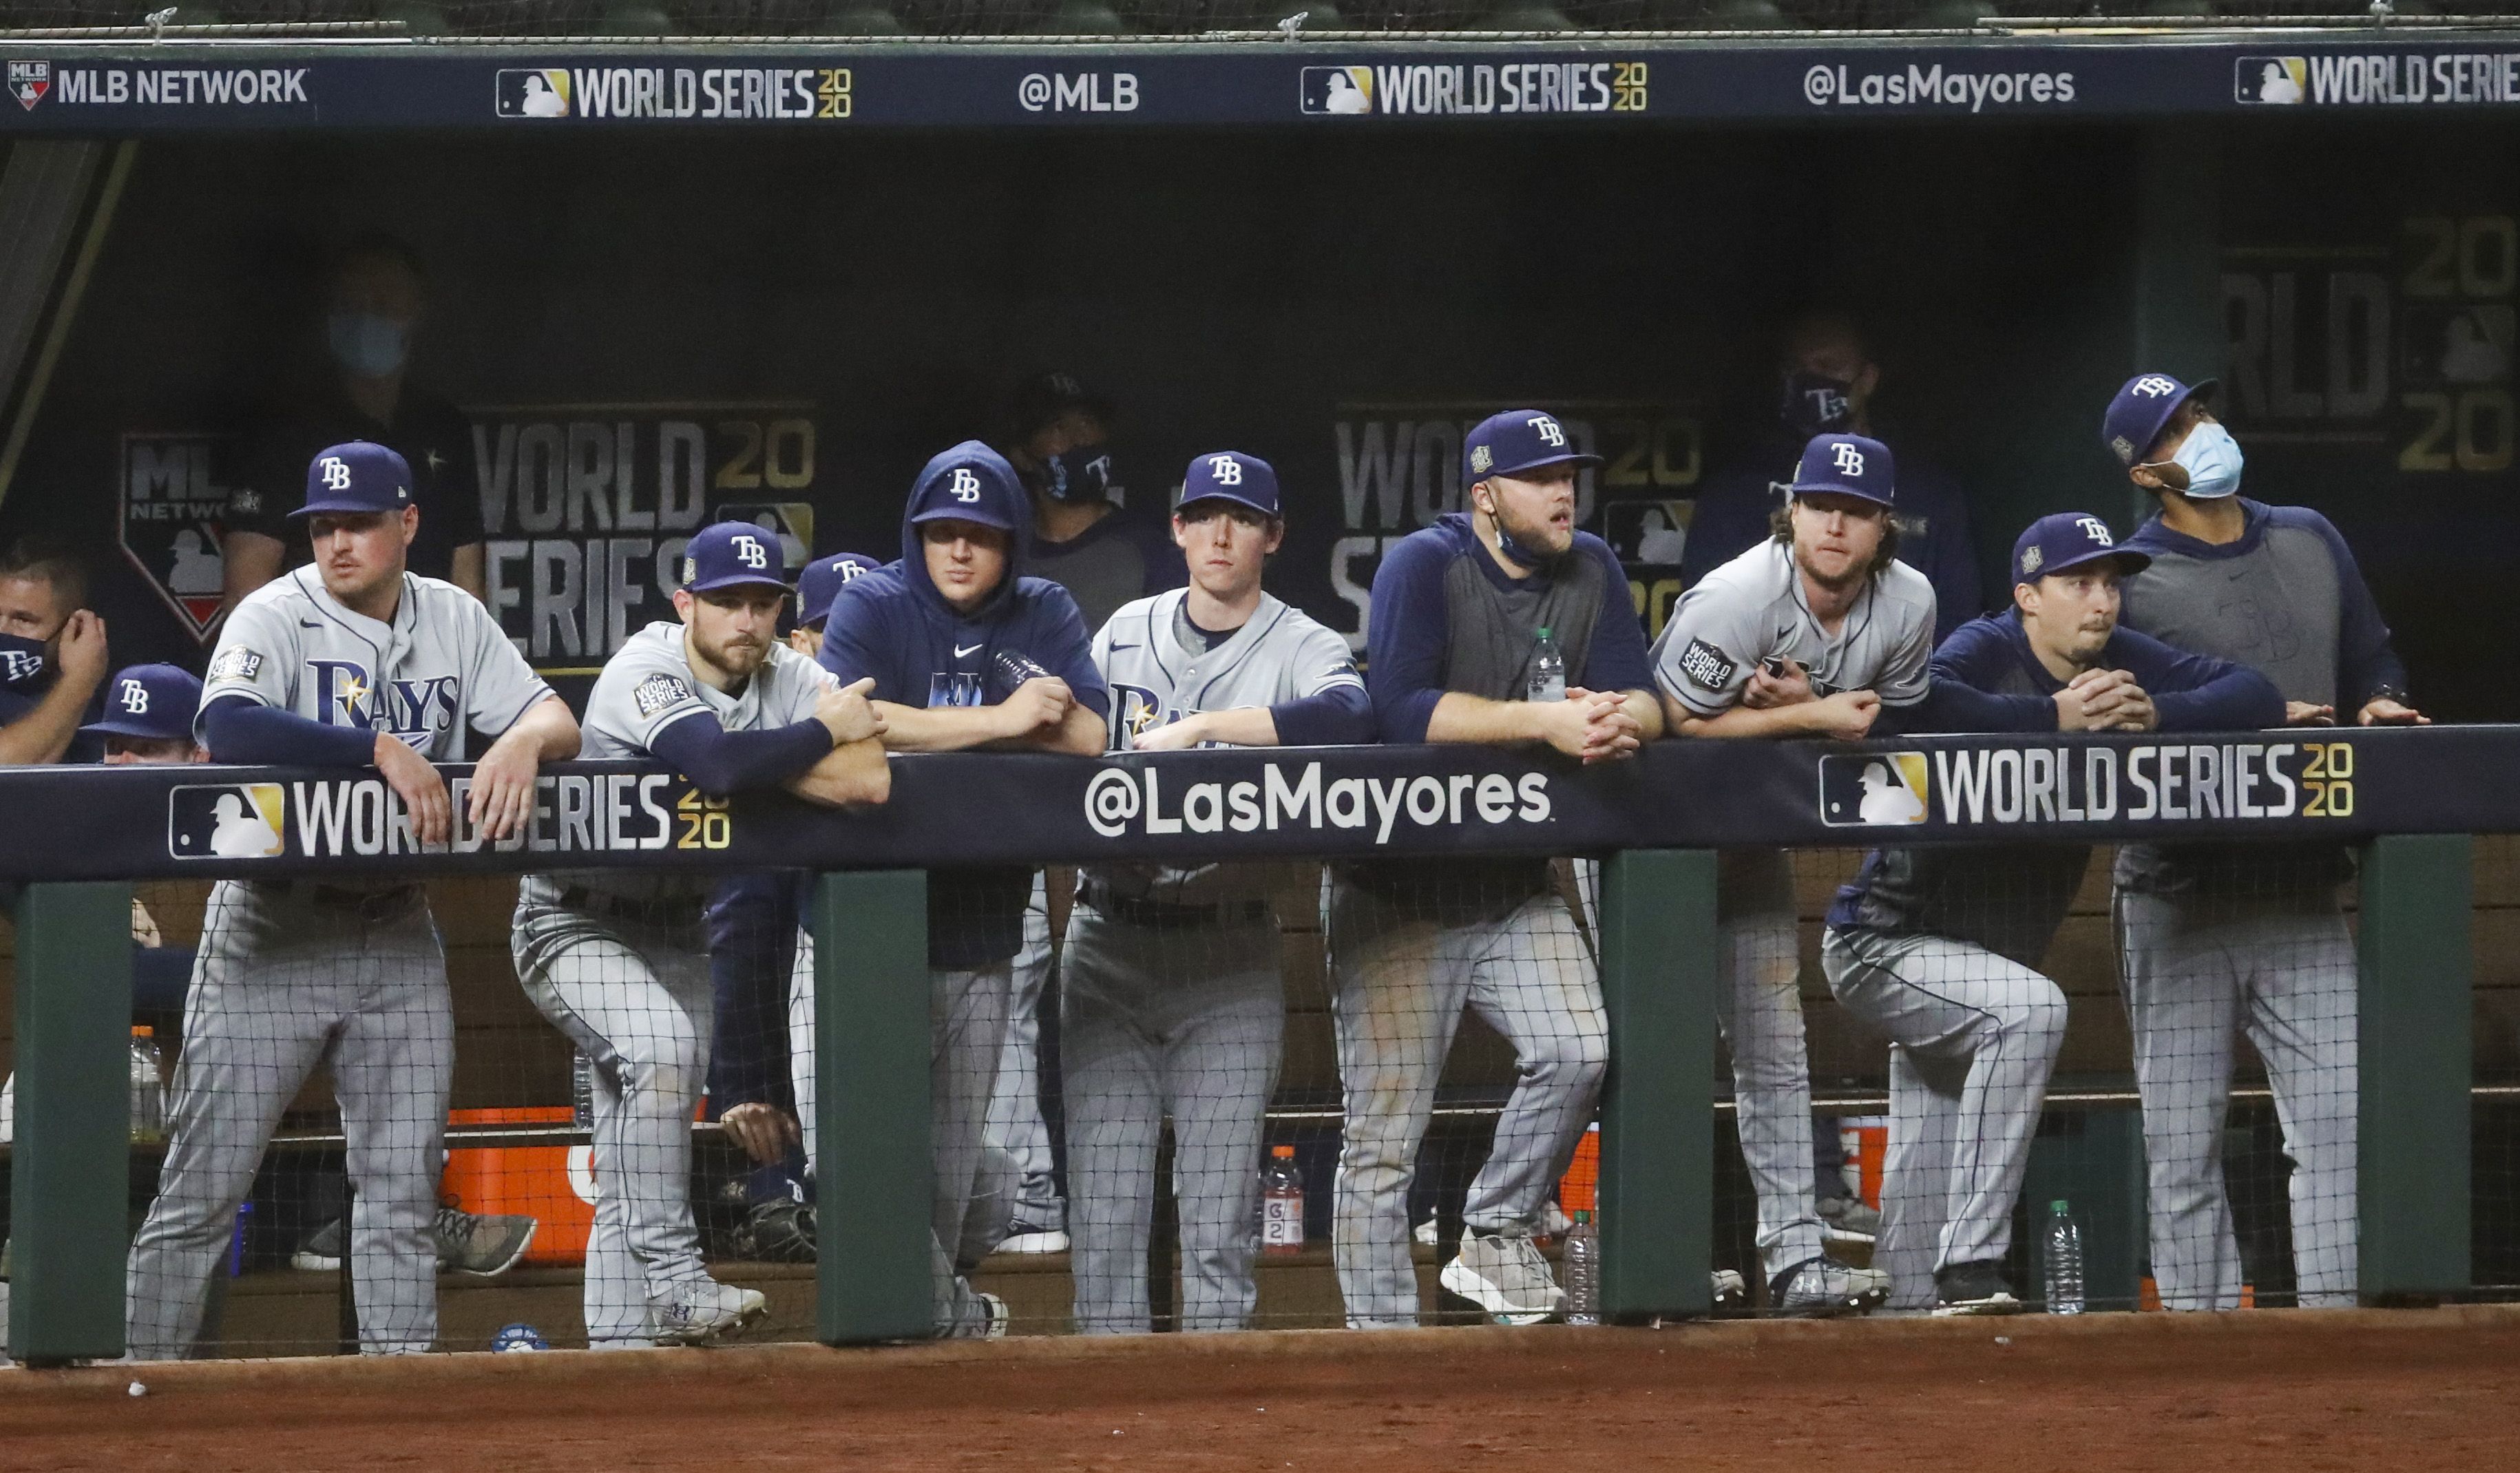 Breaking down the Rays' offense heading into the World Series - True Blue LA